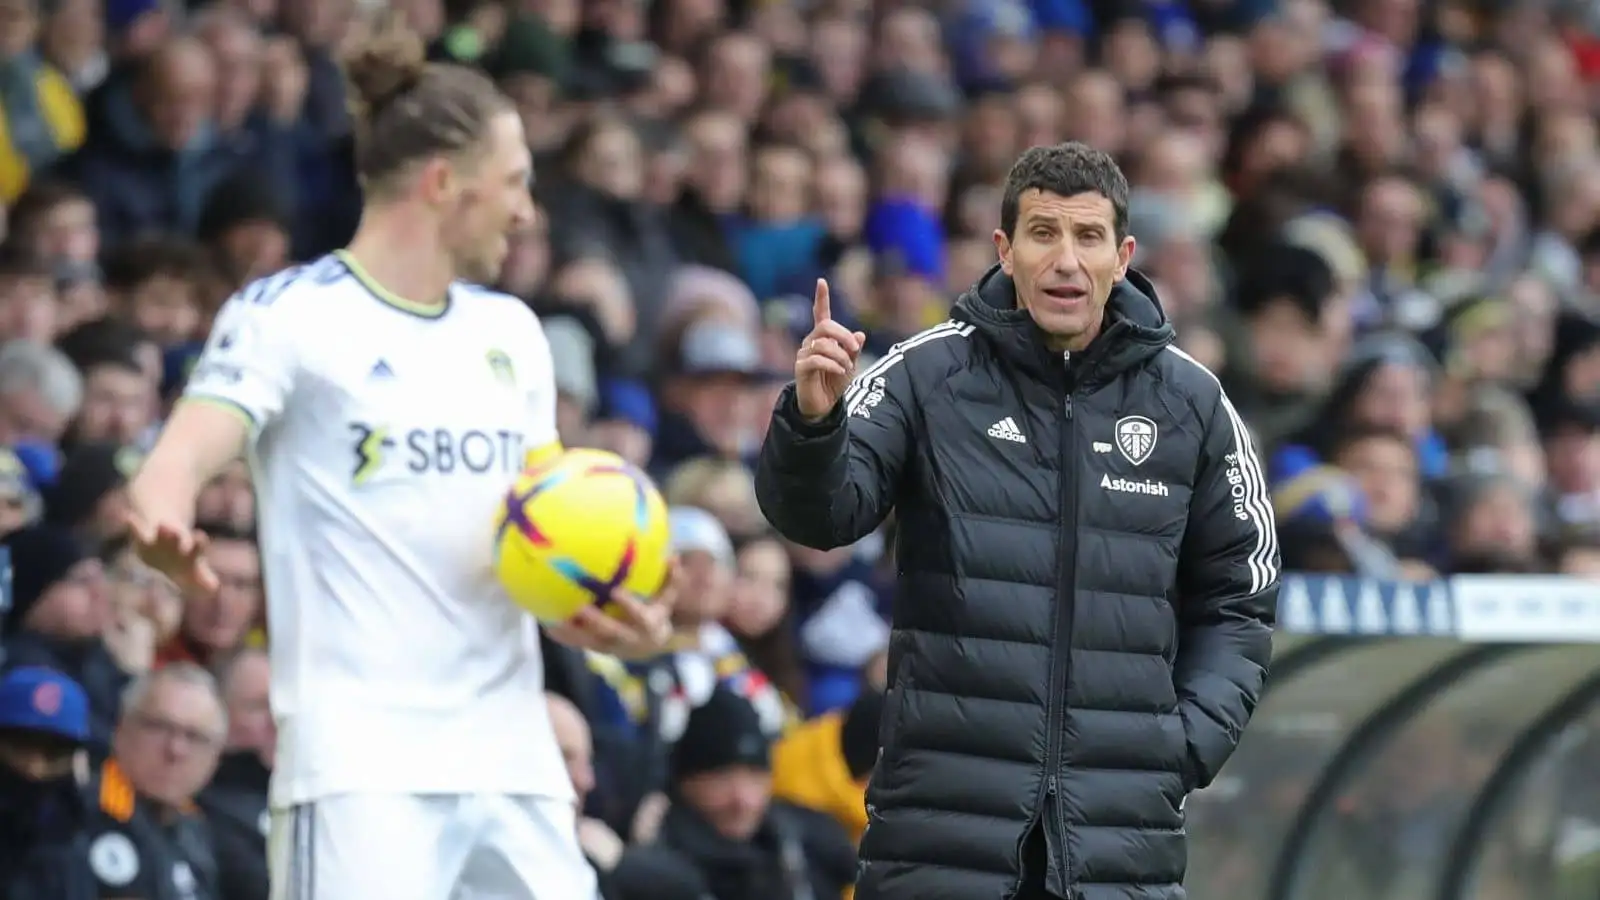 Newly appointed manager of Leeds United Javi Gracia gestures and reacts during the Premier League match Leeds United vs Southampton at Elland Road, Leeds